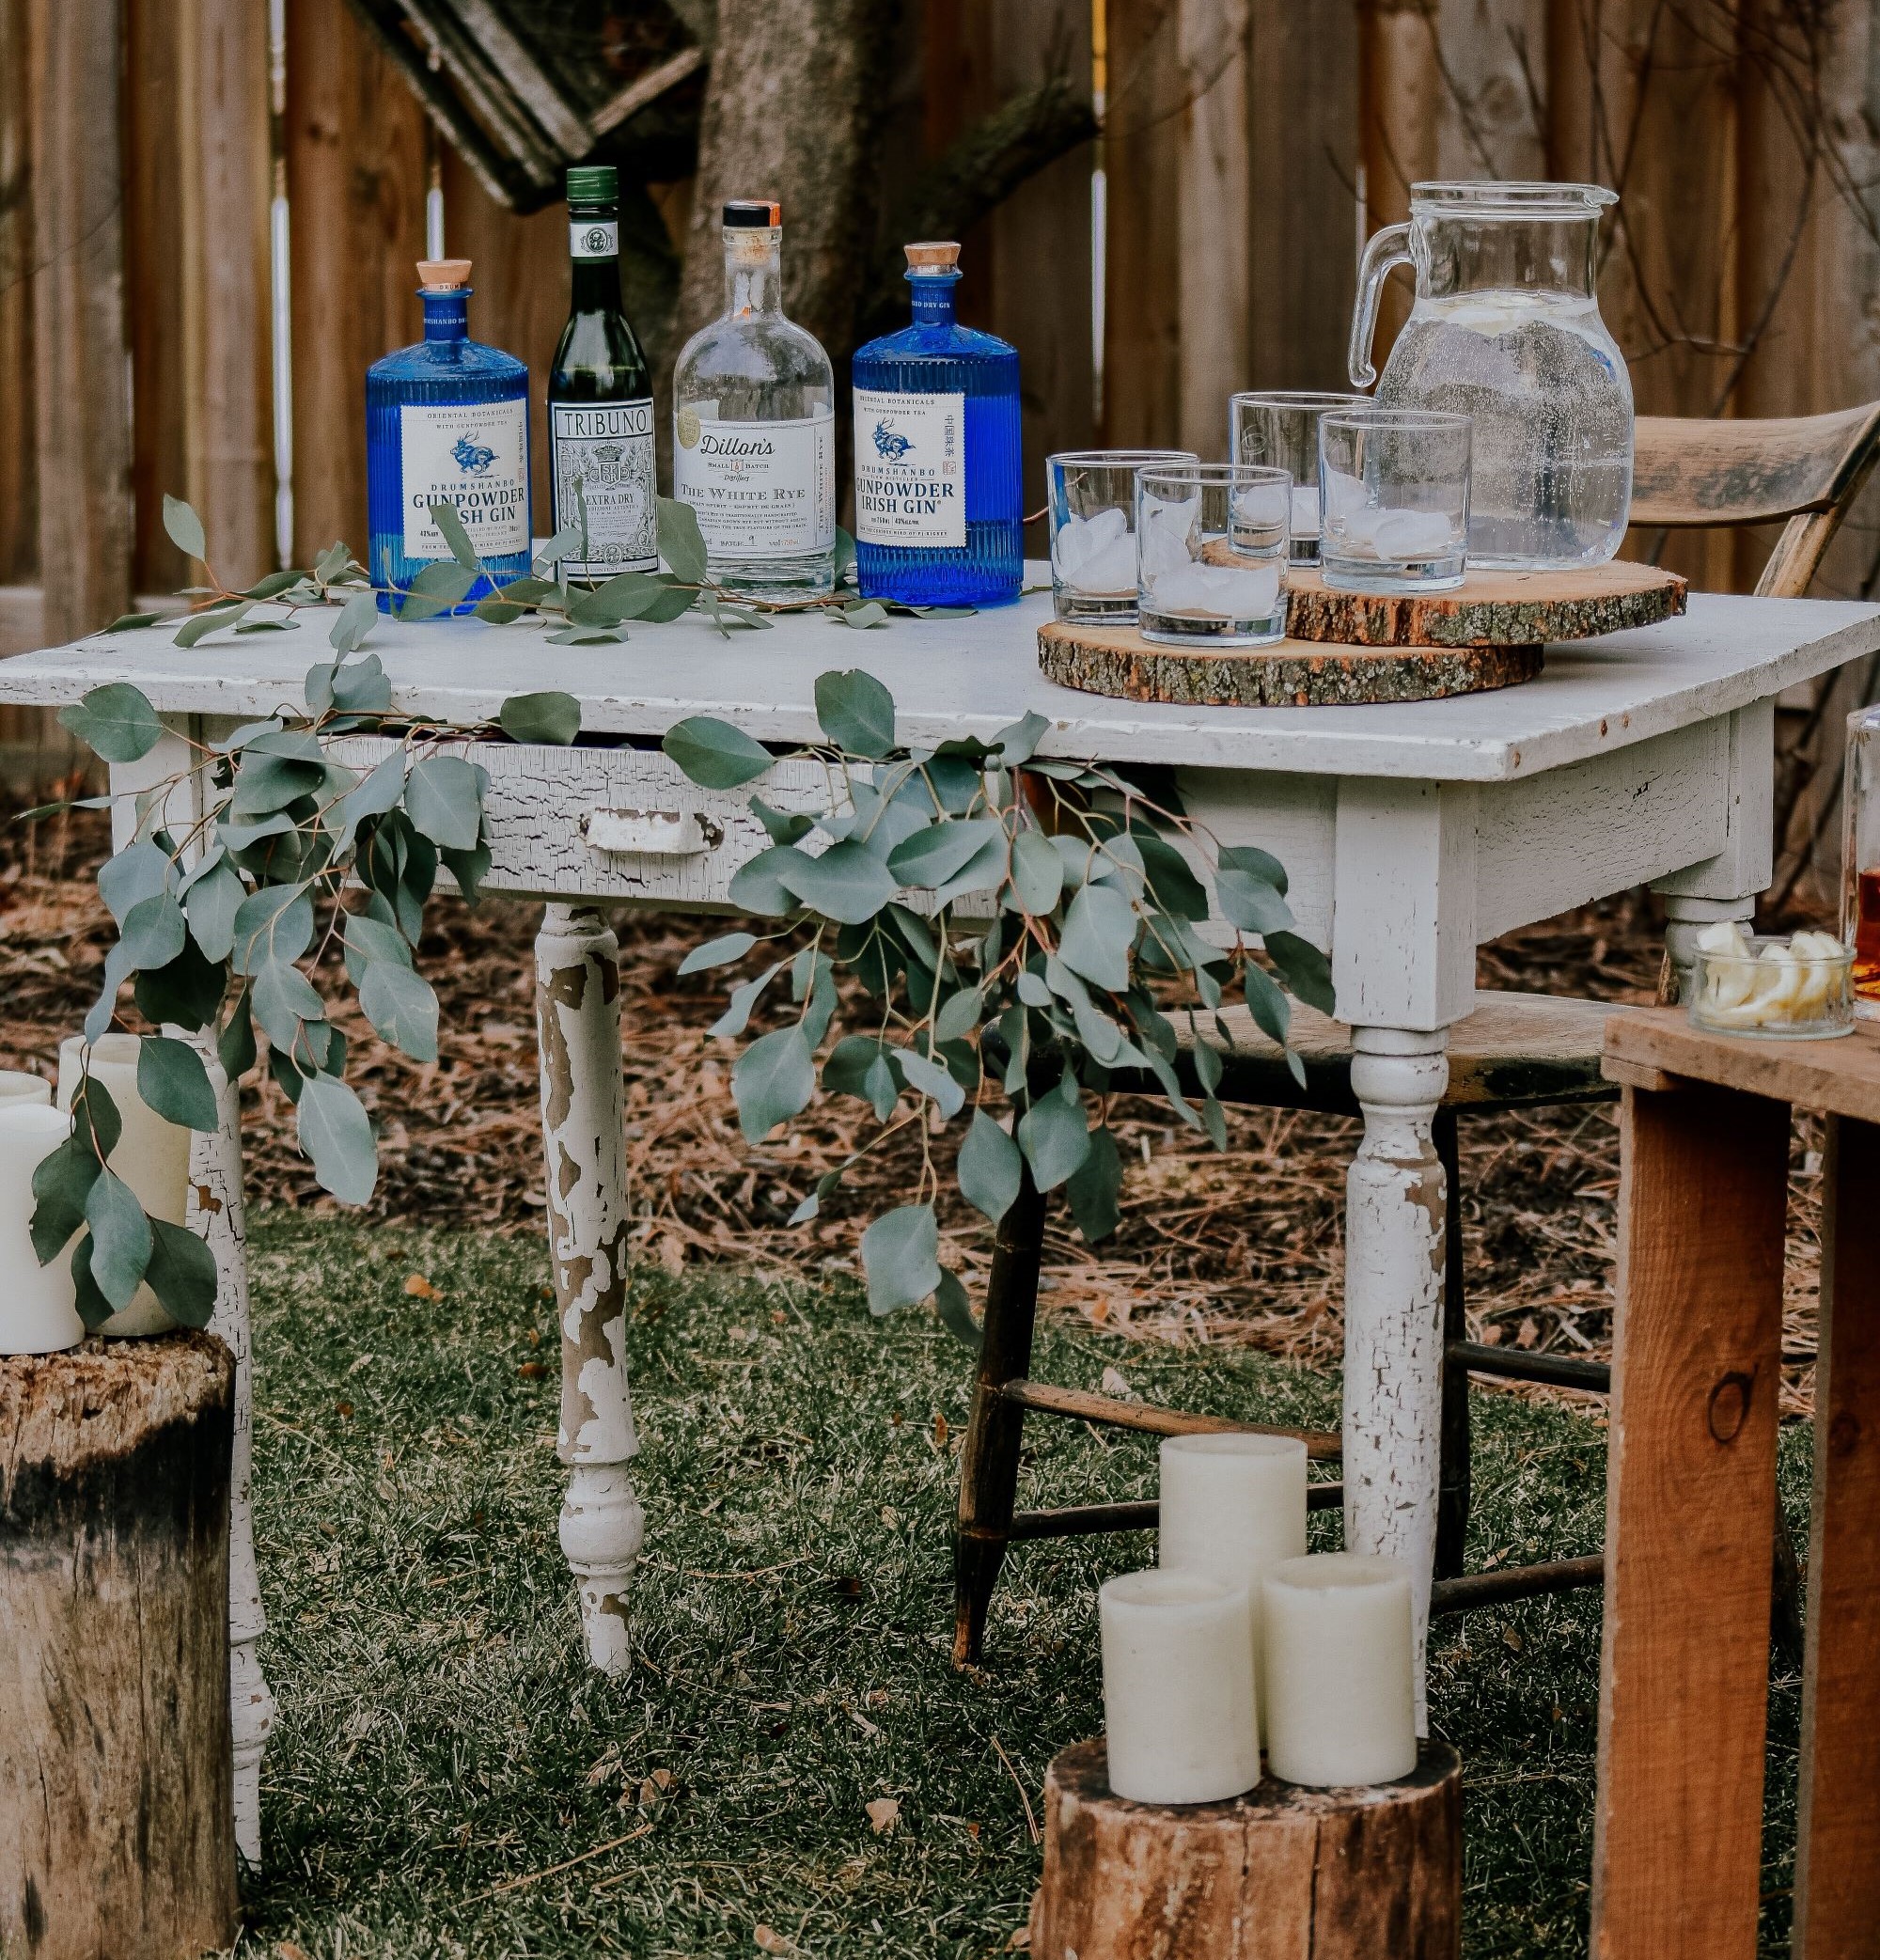 A party bar made from a small white desk with candles and water for a DIY wedding